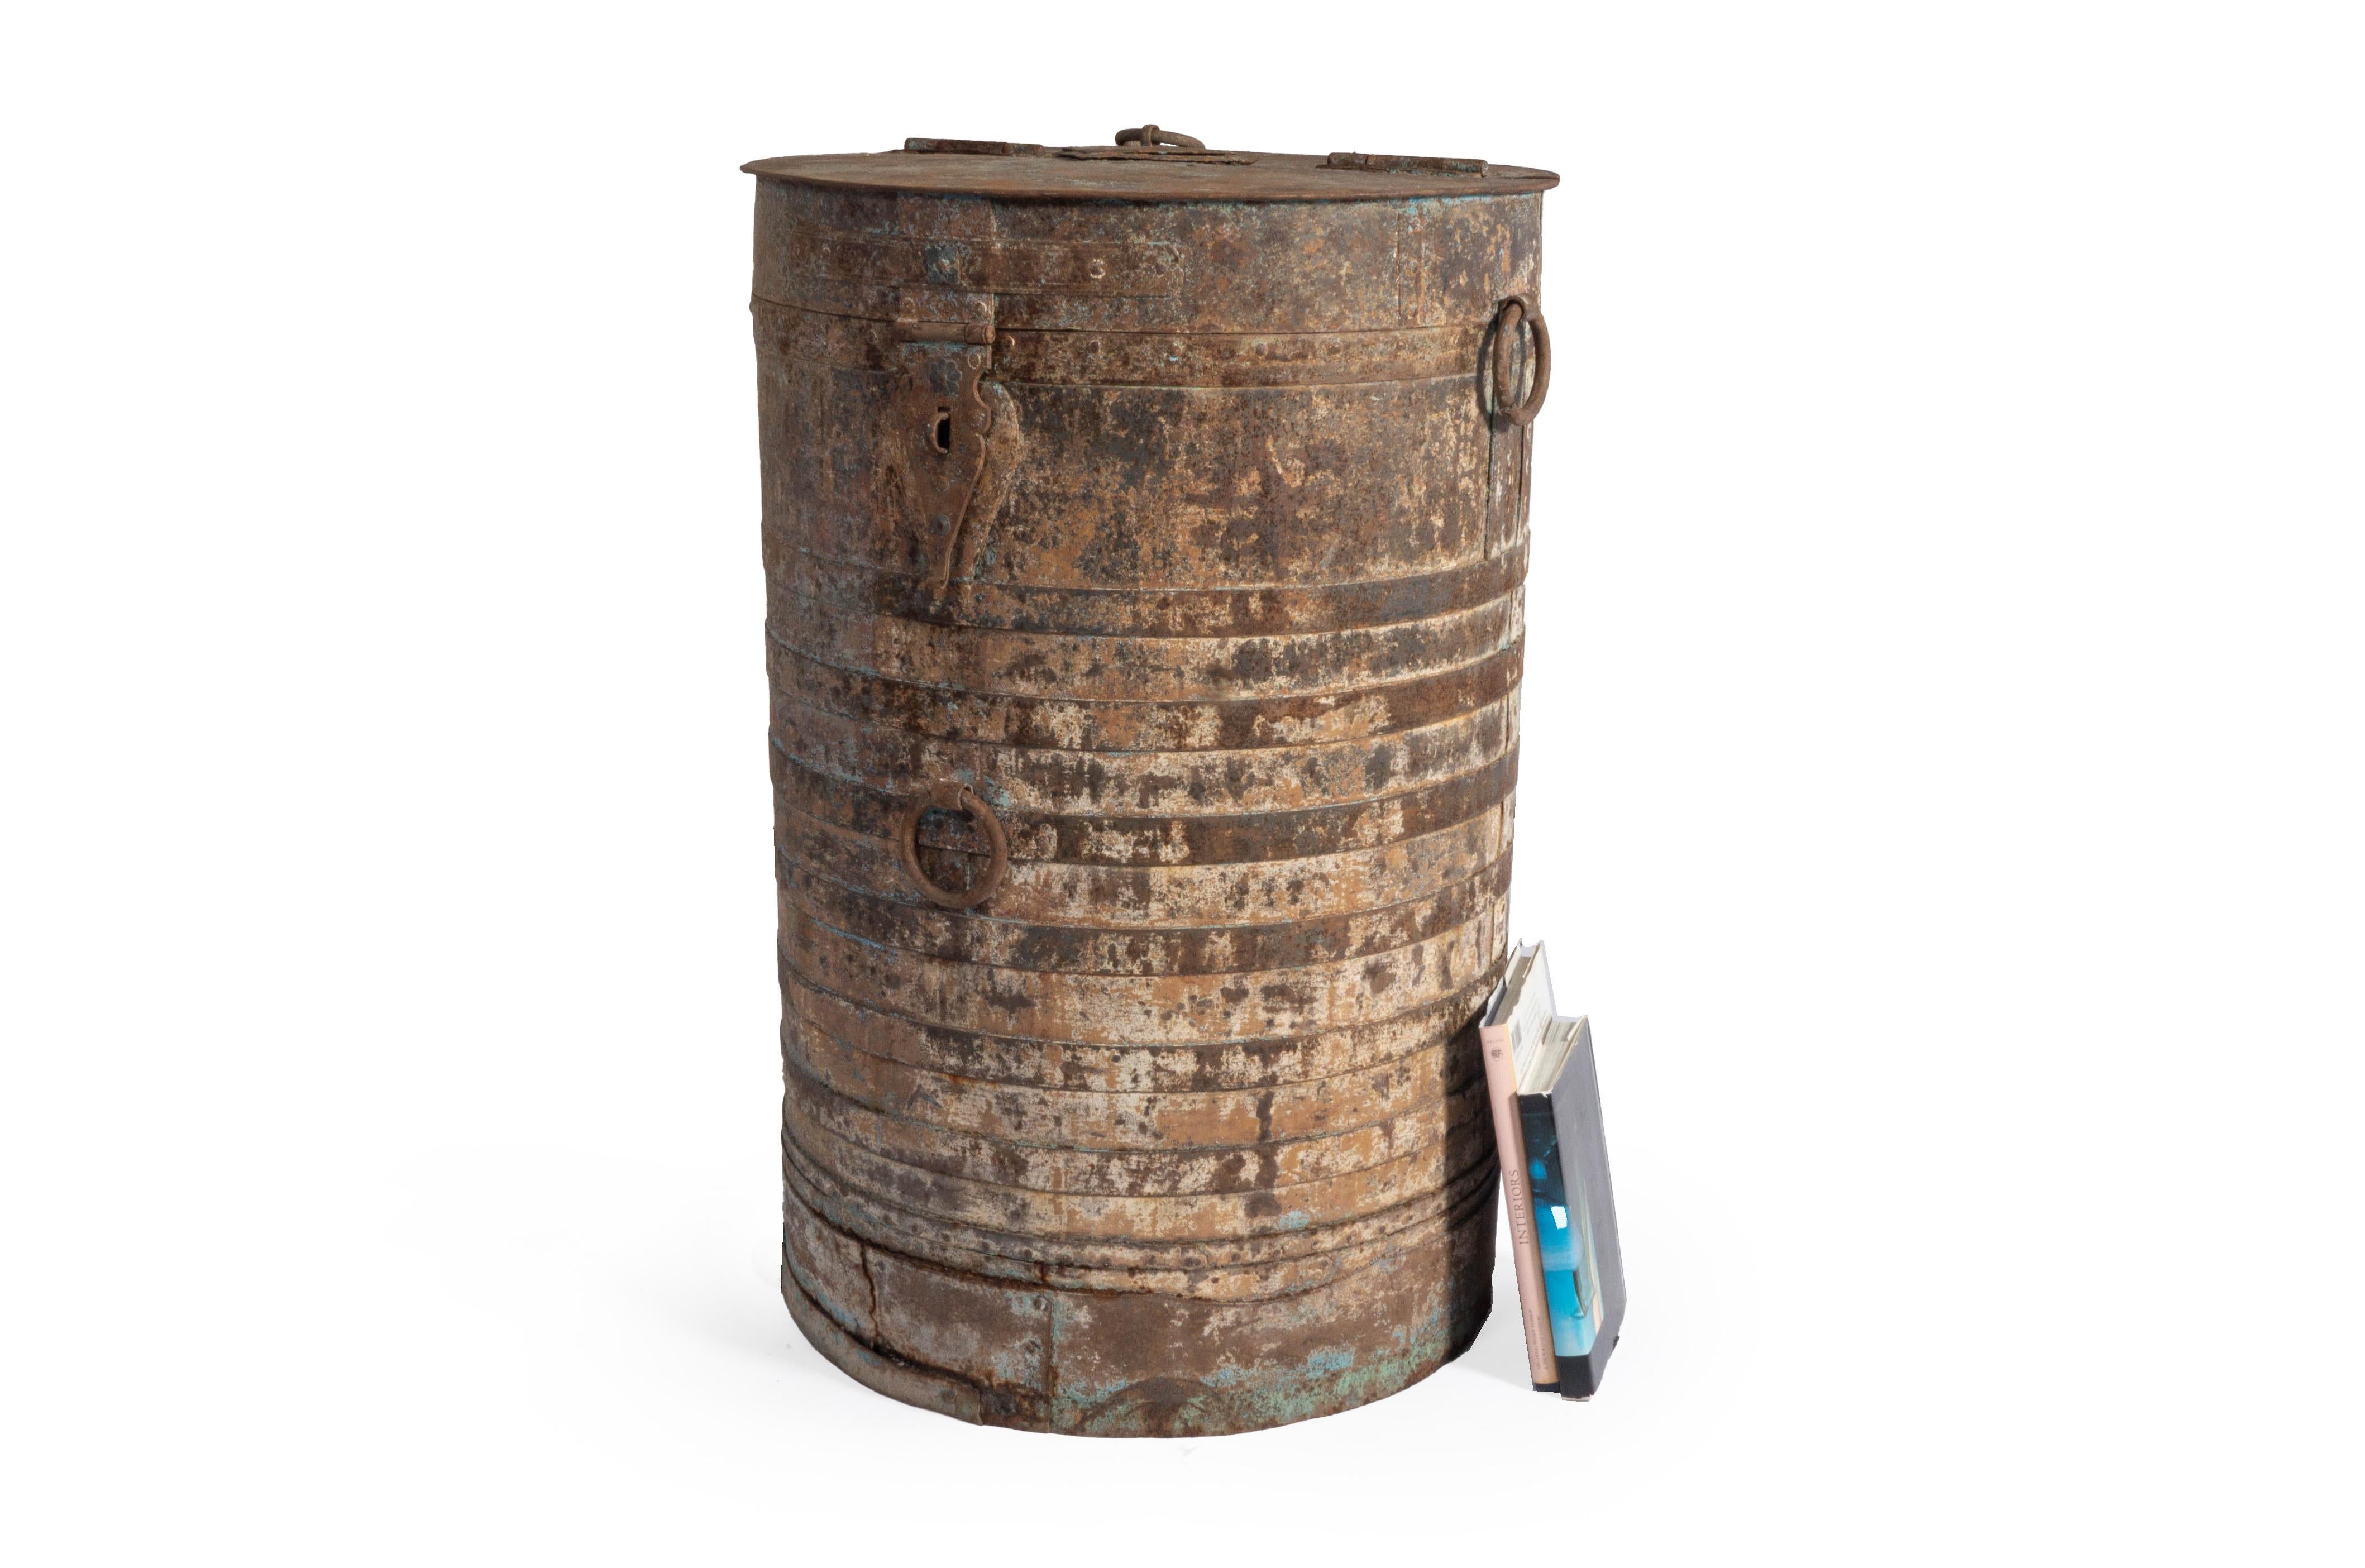 This vintage European storage bin is a great element to add to your indoor or outdoor space to add contrast in texture and color. This one of a kind storage bin is heavily weathered and rusted finish through which the original green paint patina